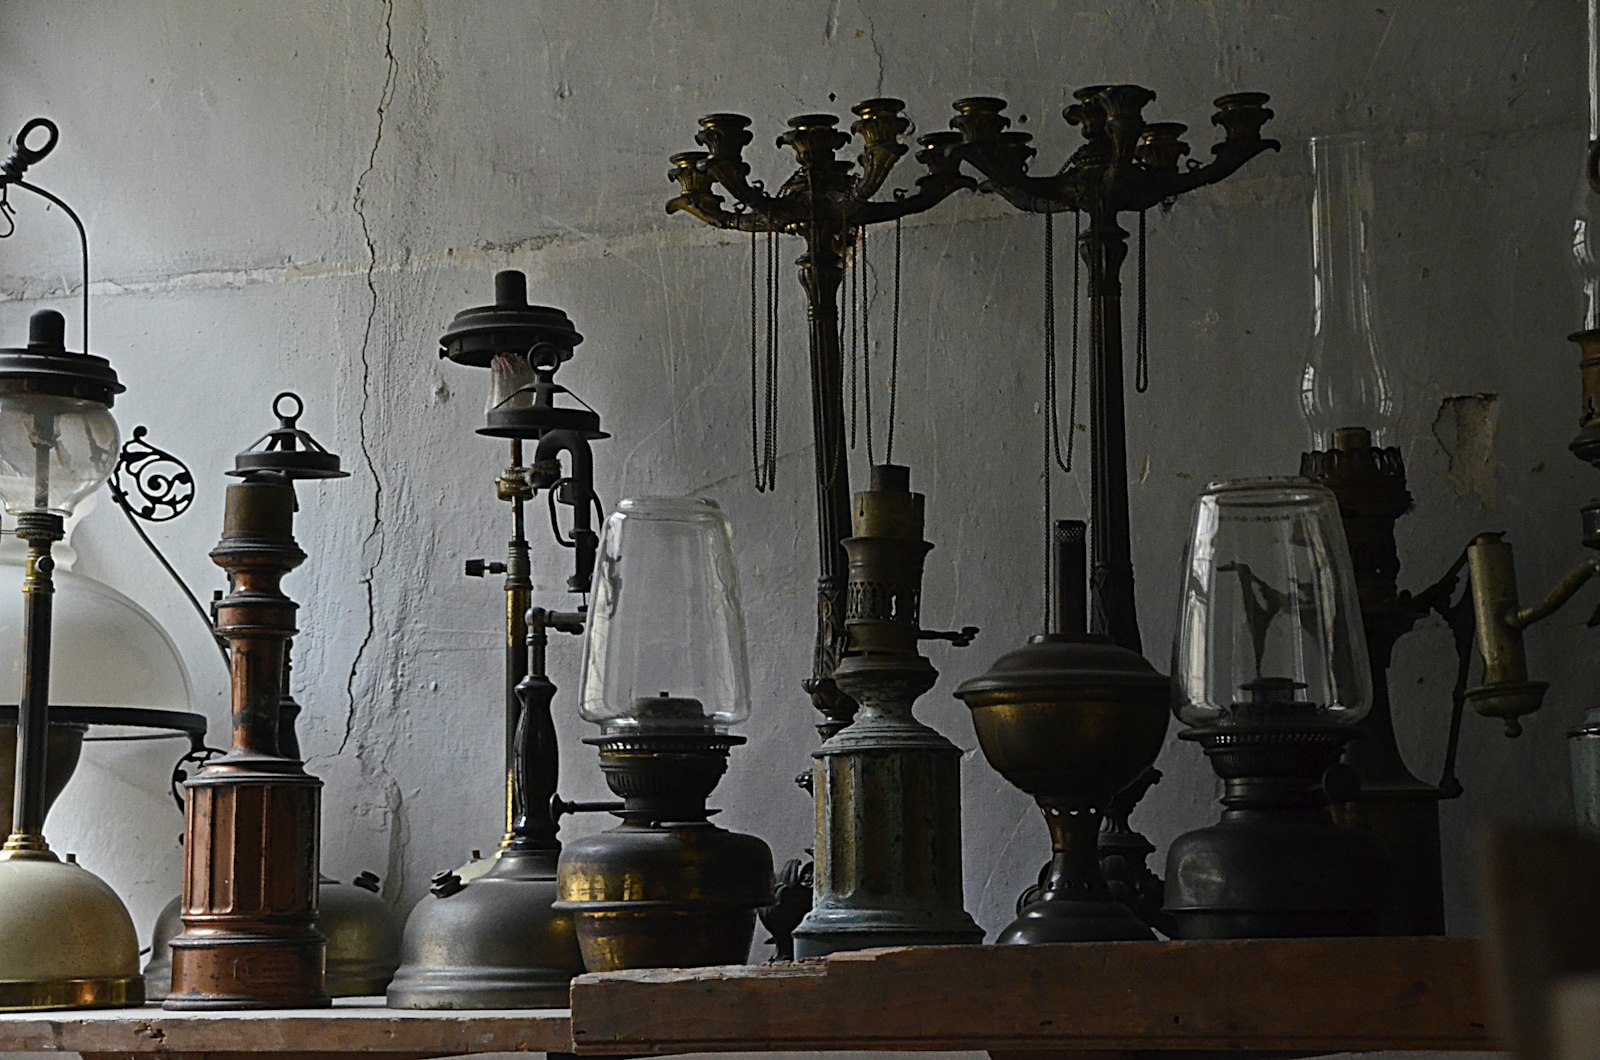 Nikon D5100 + Tamron 18-270mm F3.5-6.3 Di II VC PZD sample photo. Brass-colored oil lamps on photography